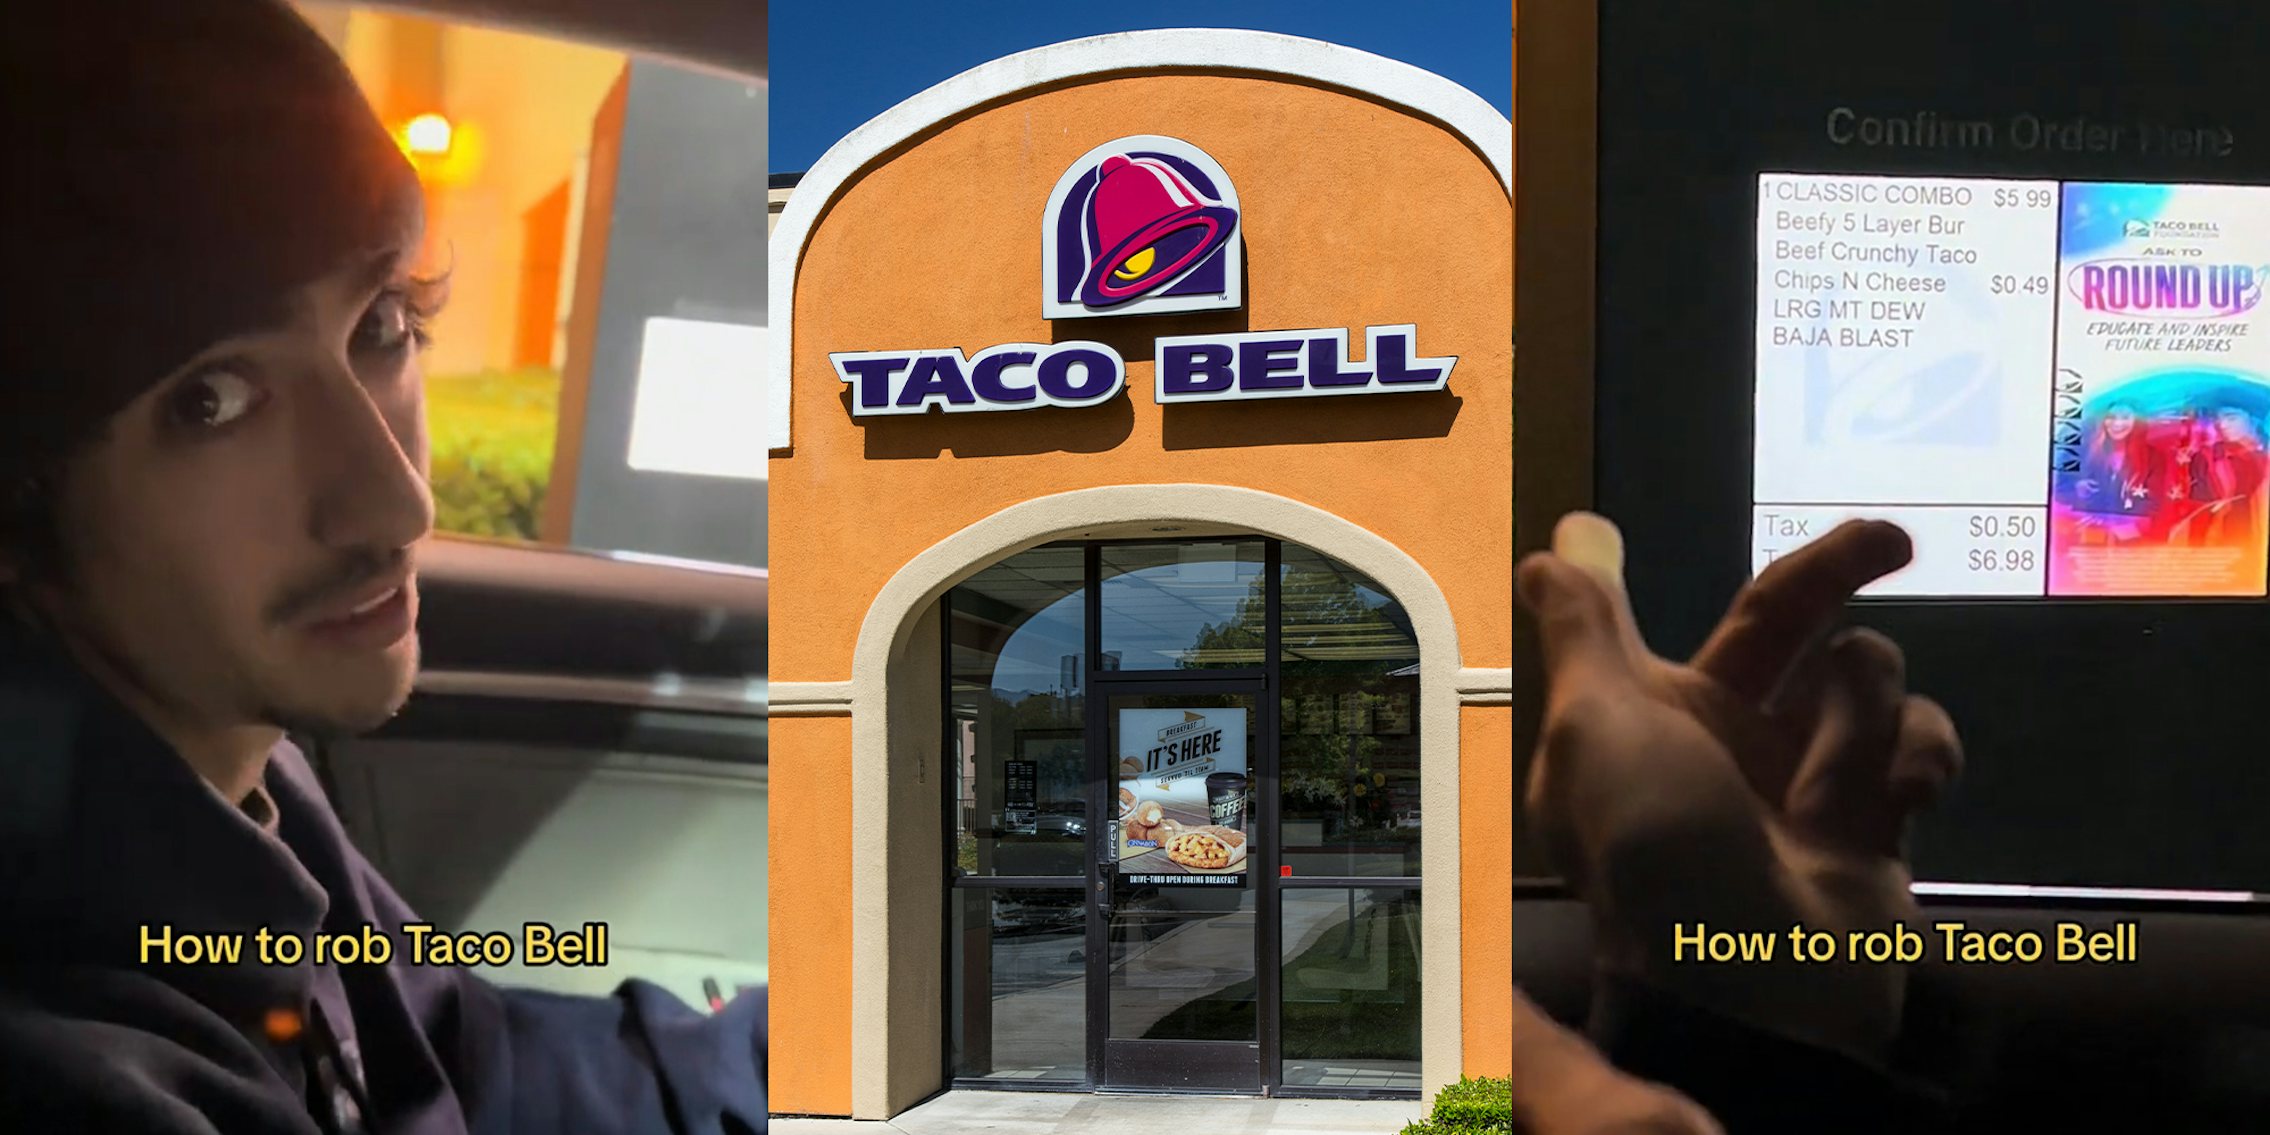 Customer shares how he 'robs' Taco Bell by ordering the Classic Combo